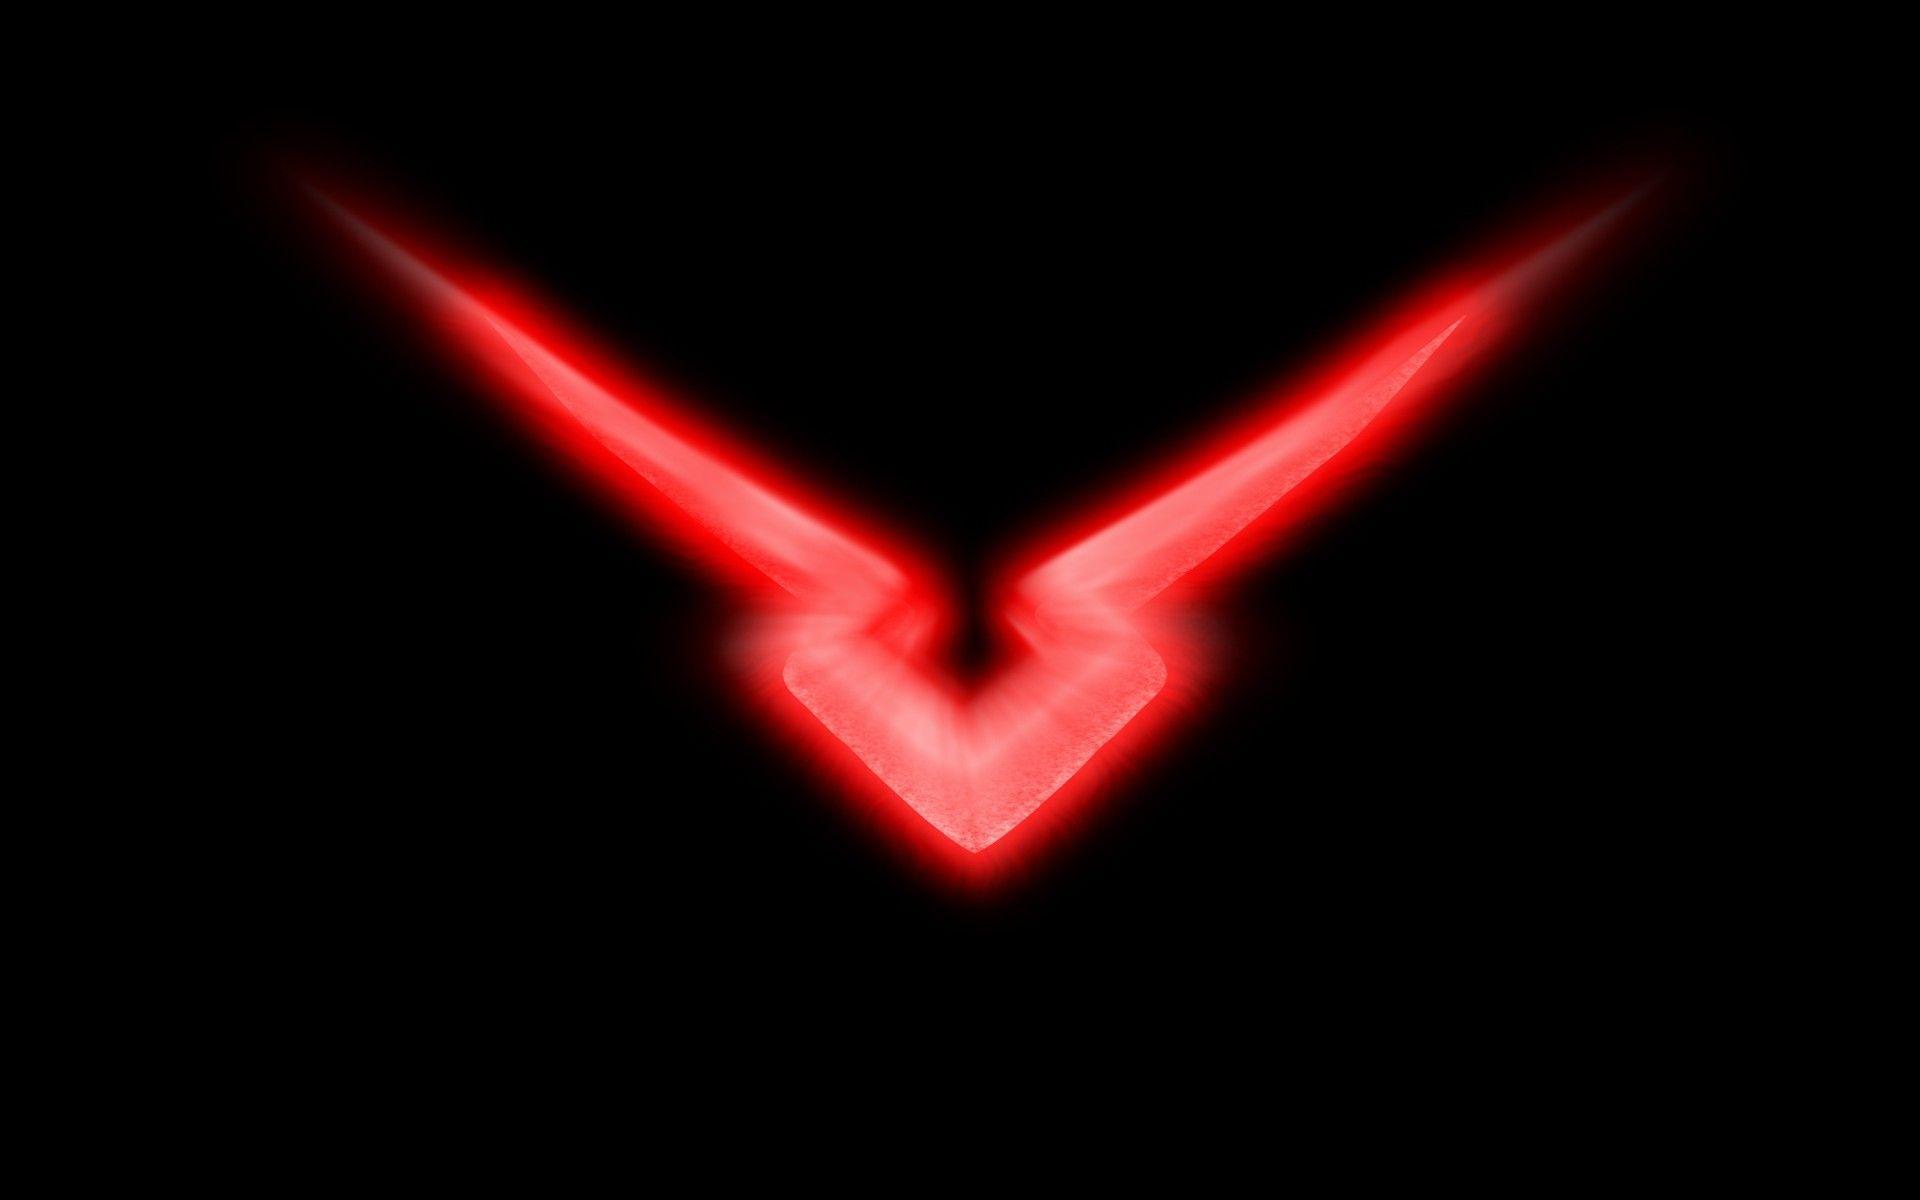 Neon red symbol on the black backgrounds wallpapers and image